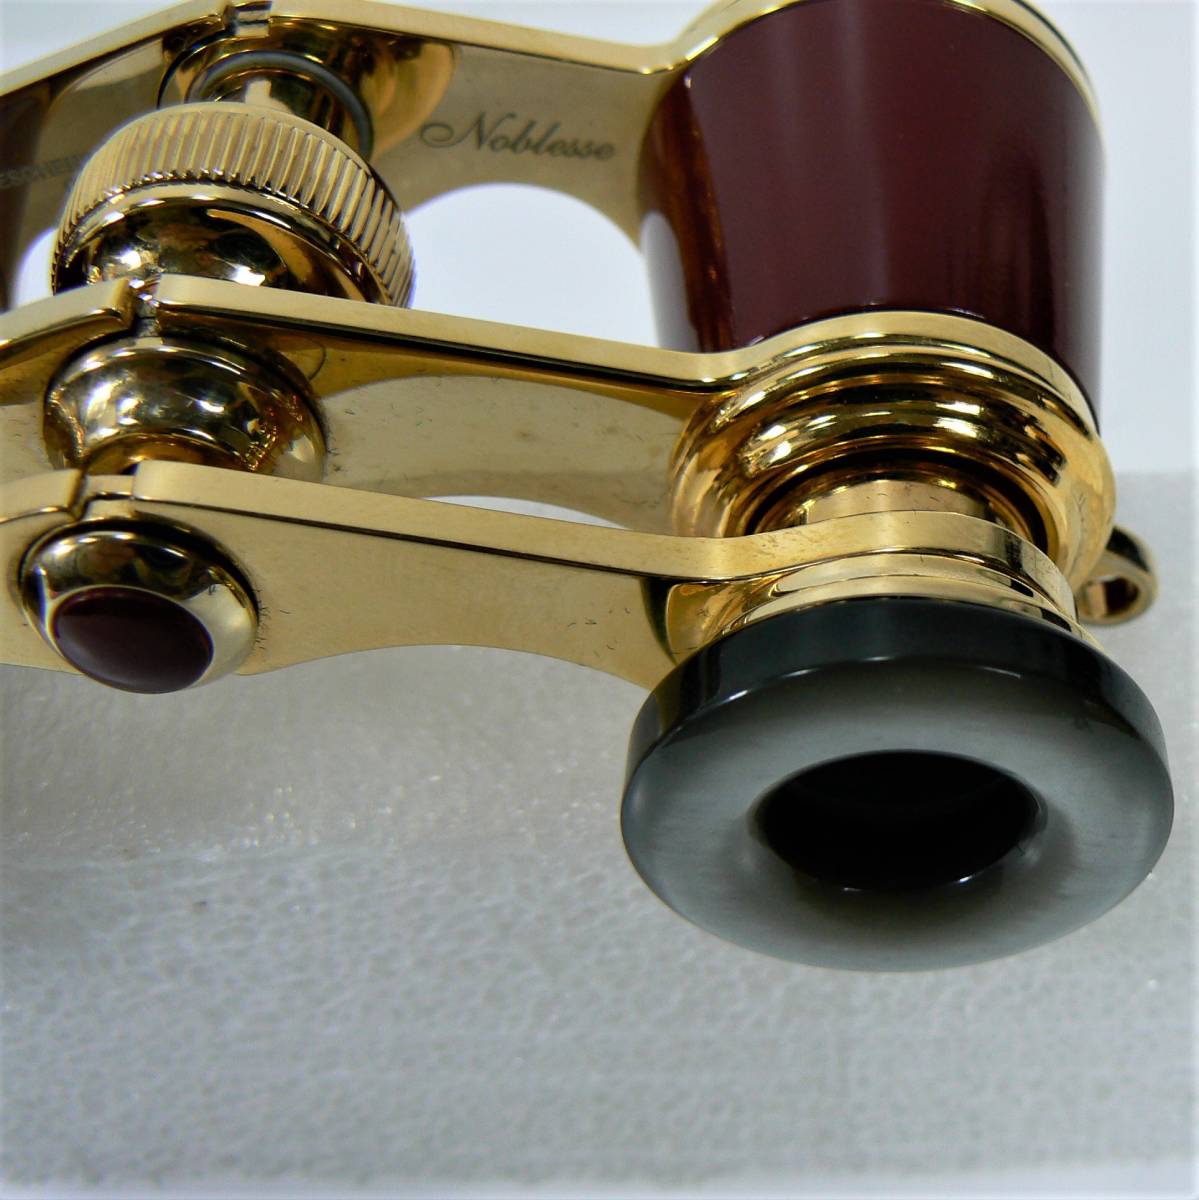  Yupack.60 size shipping. clear writing ending Eschenbach.Noblesse.Germany. opera glasses.1000*0069 high class. beautiful. elegant binoculars. Germany made ( red frame )